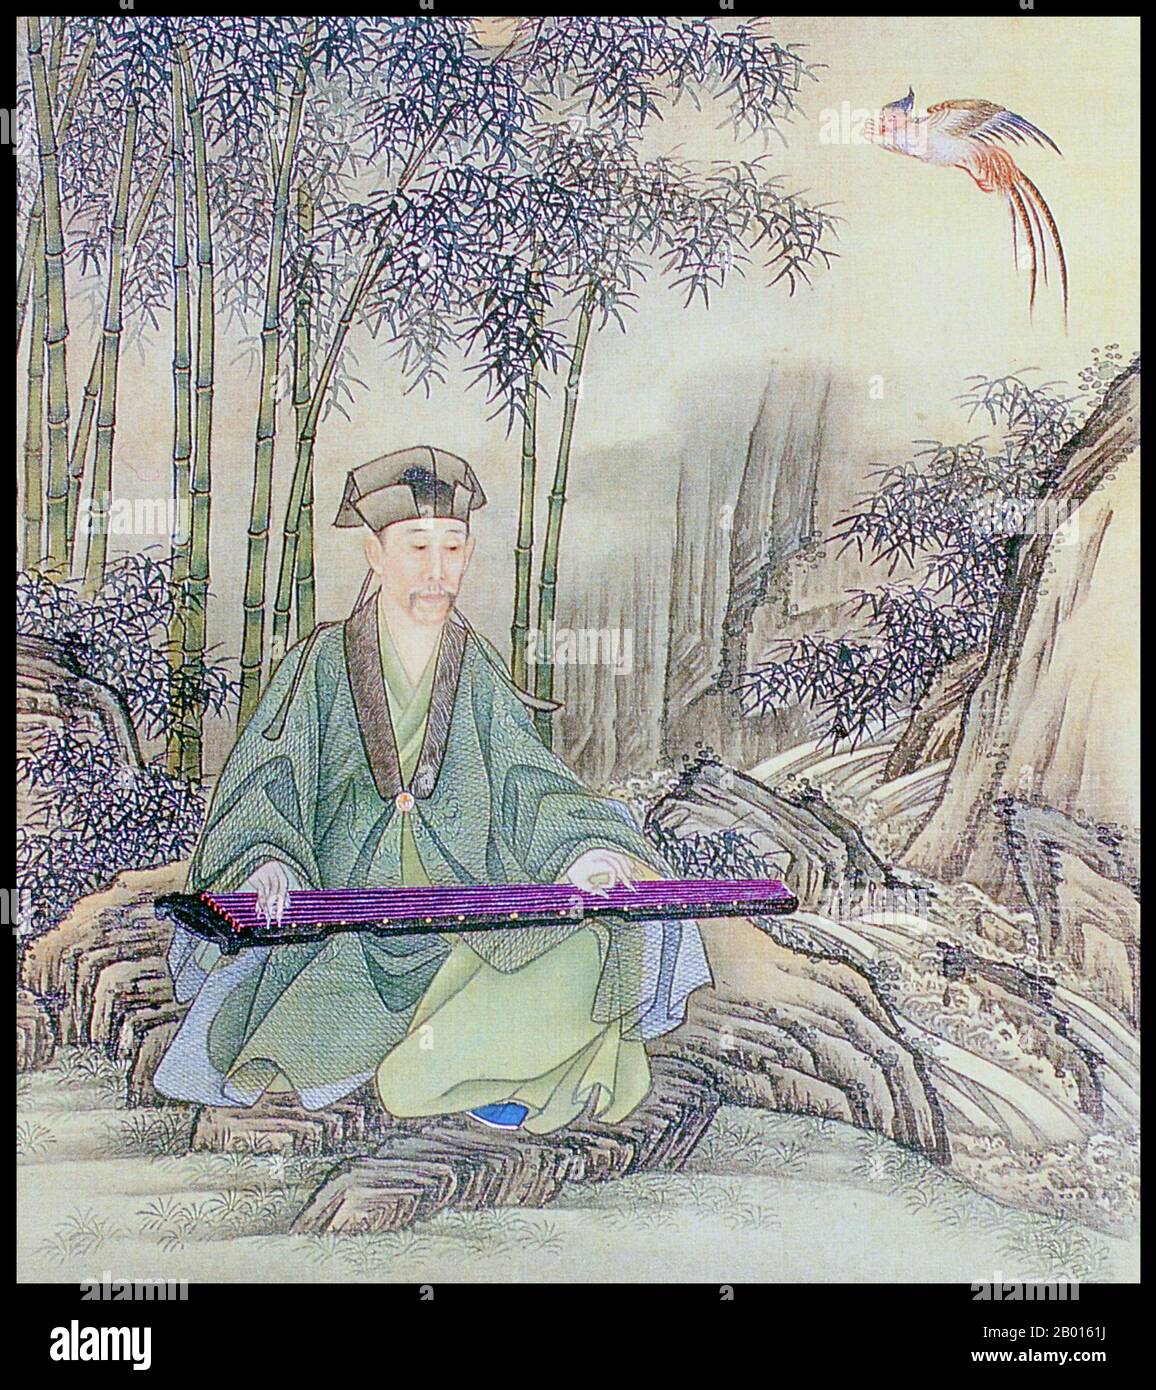 China: Emperor Yongzheng (13 December 1678 – 8 October 1735), 5th ruler of the Qing Dynasty (r. 1722-1735), playing a guzheng. Album leaf painting, c. 1723-1735.  The Yongzheng Emperor, born Yinzhen and temple name Shizong, was the fifth emperor of the Qing Dynasty. A hard-working ruler, Yongzheng's main goal was to create an effective government at minimum expense. Like his father, the Kangxi Emperor, Yongzheng used military force in order to preserve the dynasty's position. Suspected by historians to have usurped the throne, his reign was often called despotic, efficient, and vigorous. Stock Photo